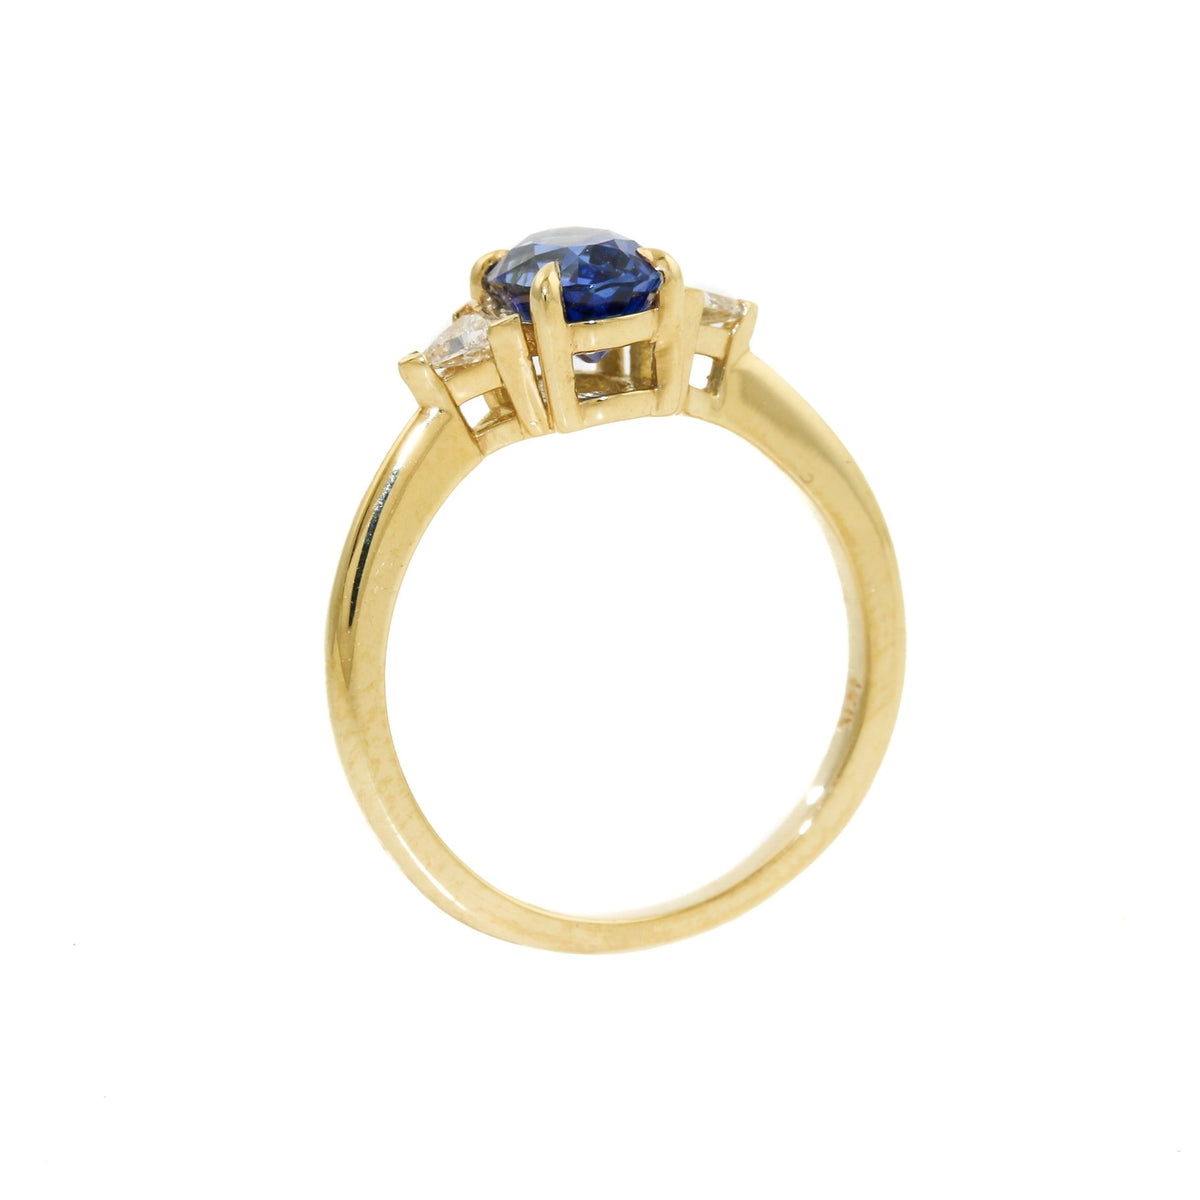 Introducing our breathtaking royal blue Montana sapphire ring with triangle cut diamonds set in 18k gold, a true masterpiece of beauty, luxury and elegance.